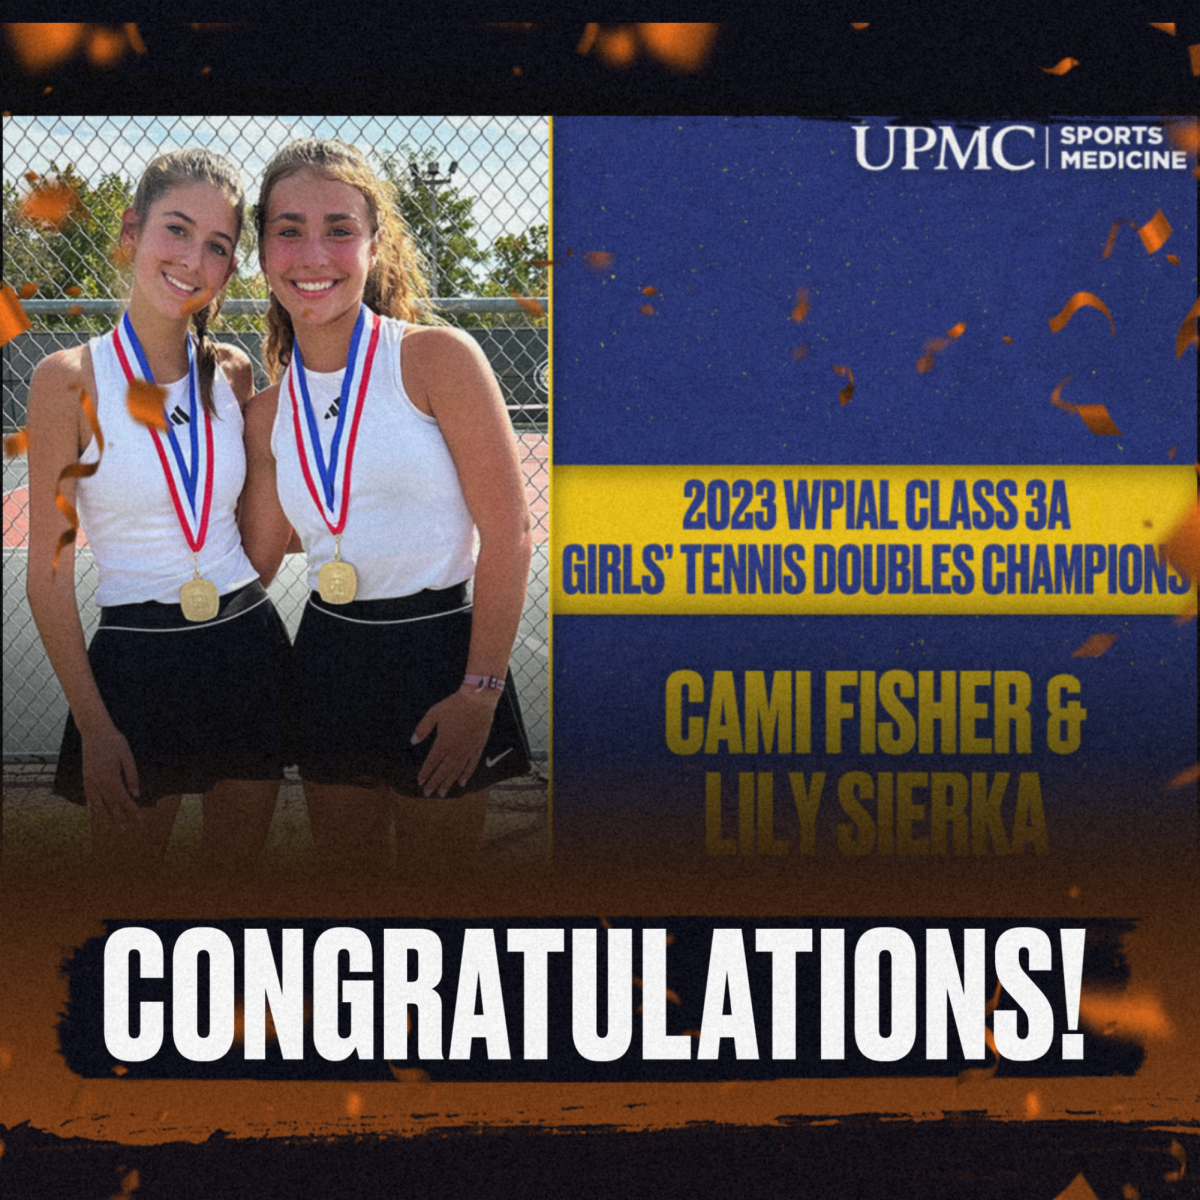 Lily Sierka and Cami Fisher are the first WPIAL girls tennis doubles champions in school history.